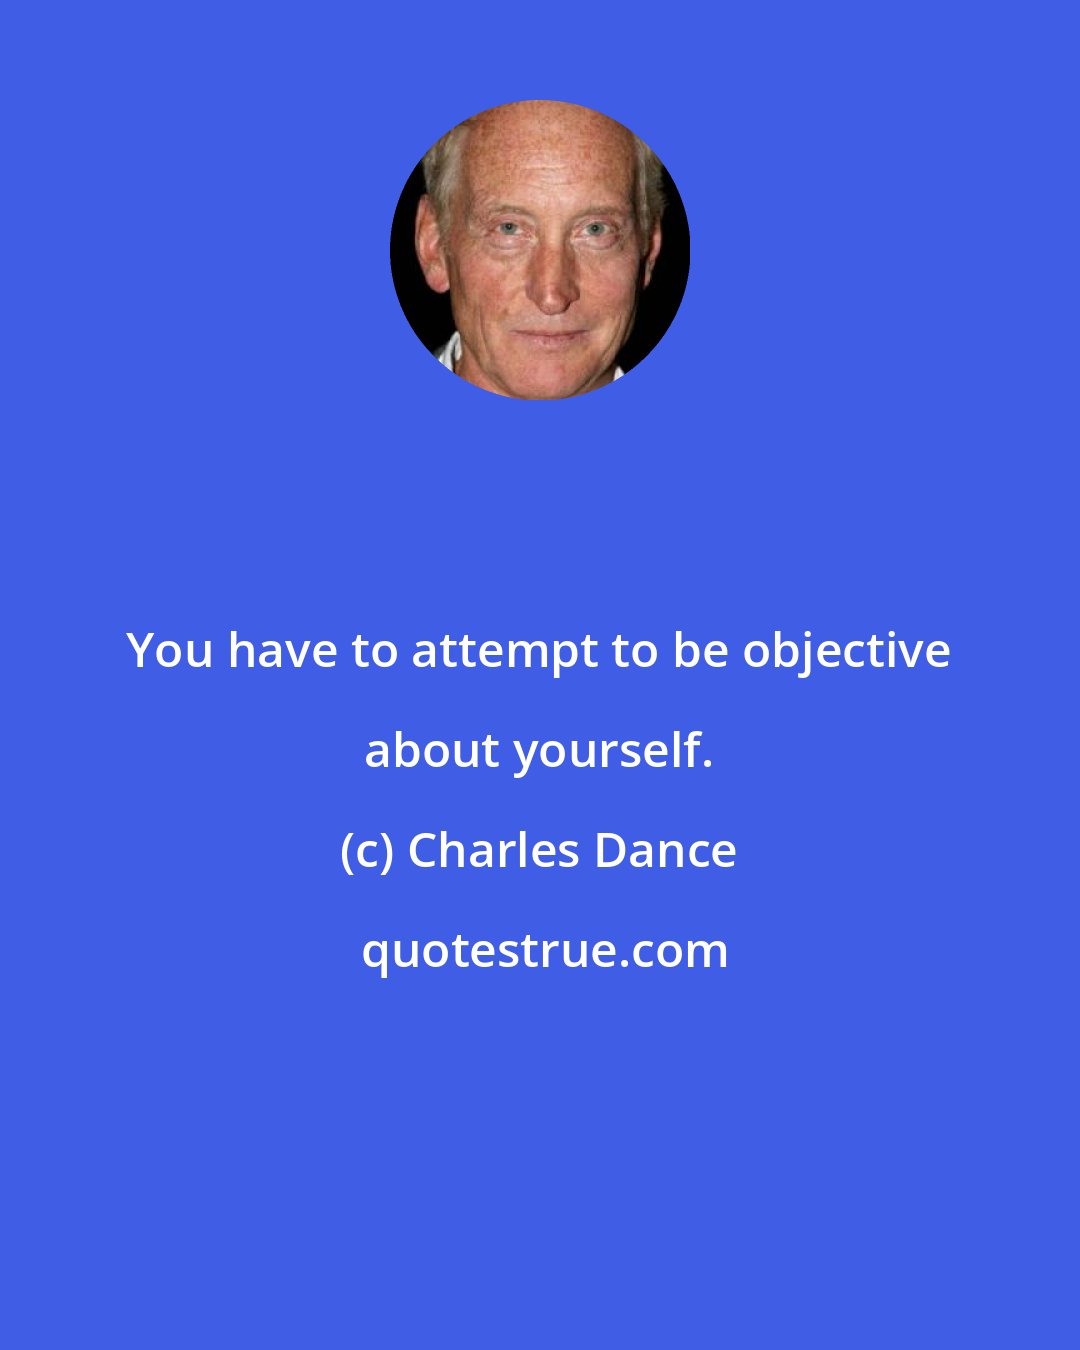 Charles Dance: You have to attempt to be objective about yourself.